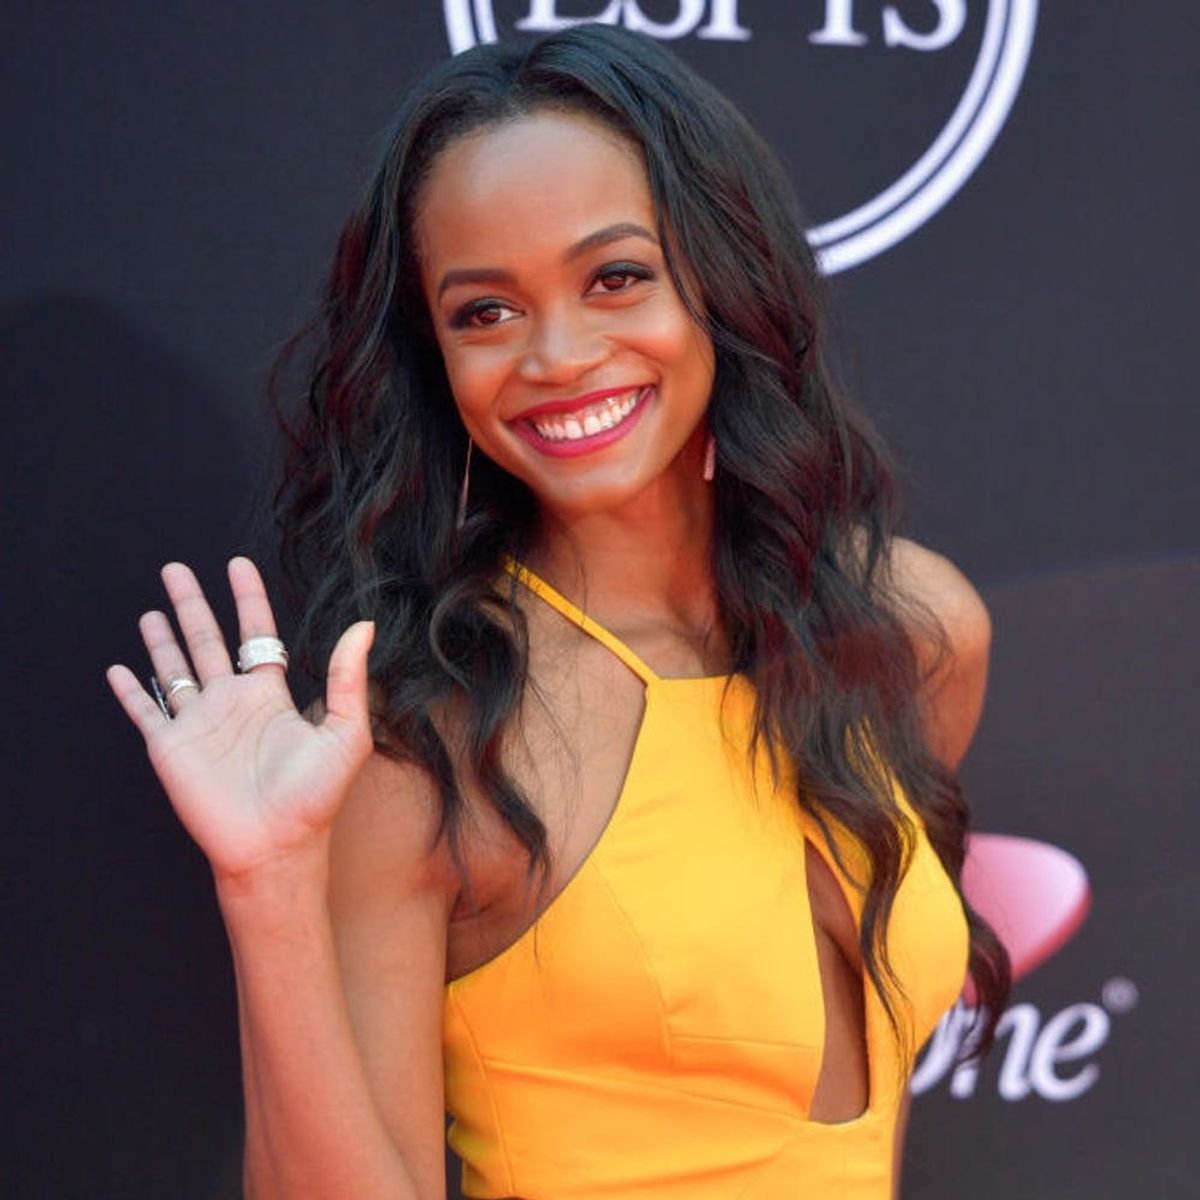 The Bachelorette’s Rachel Lindsay Dishes About Her Secret Dates With Her Fiancé